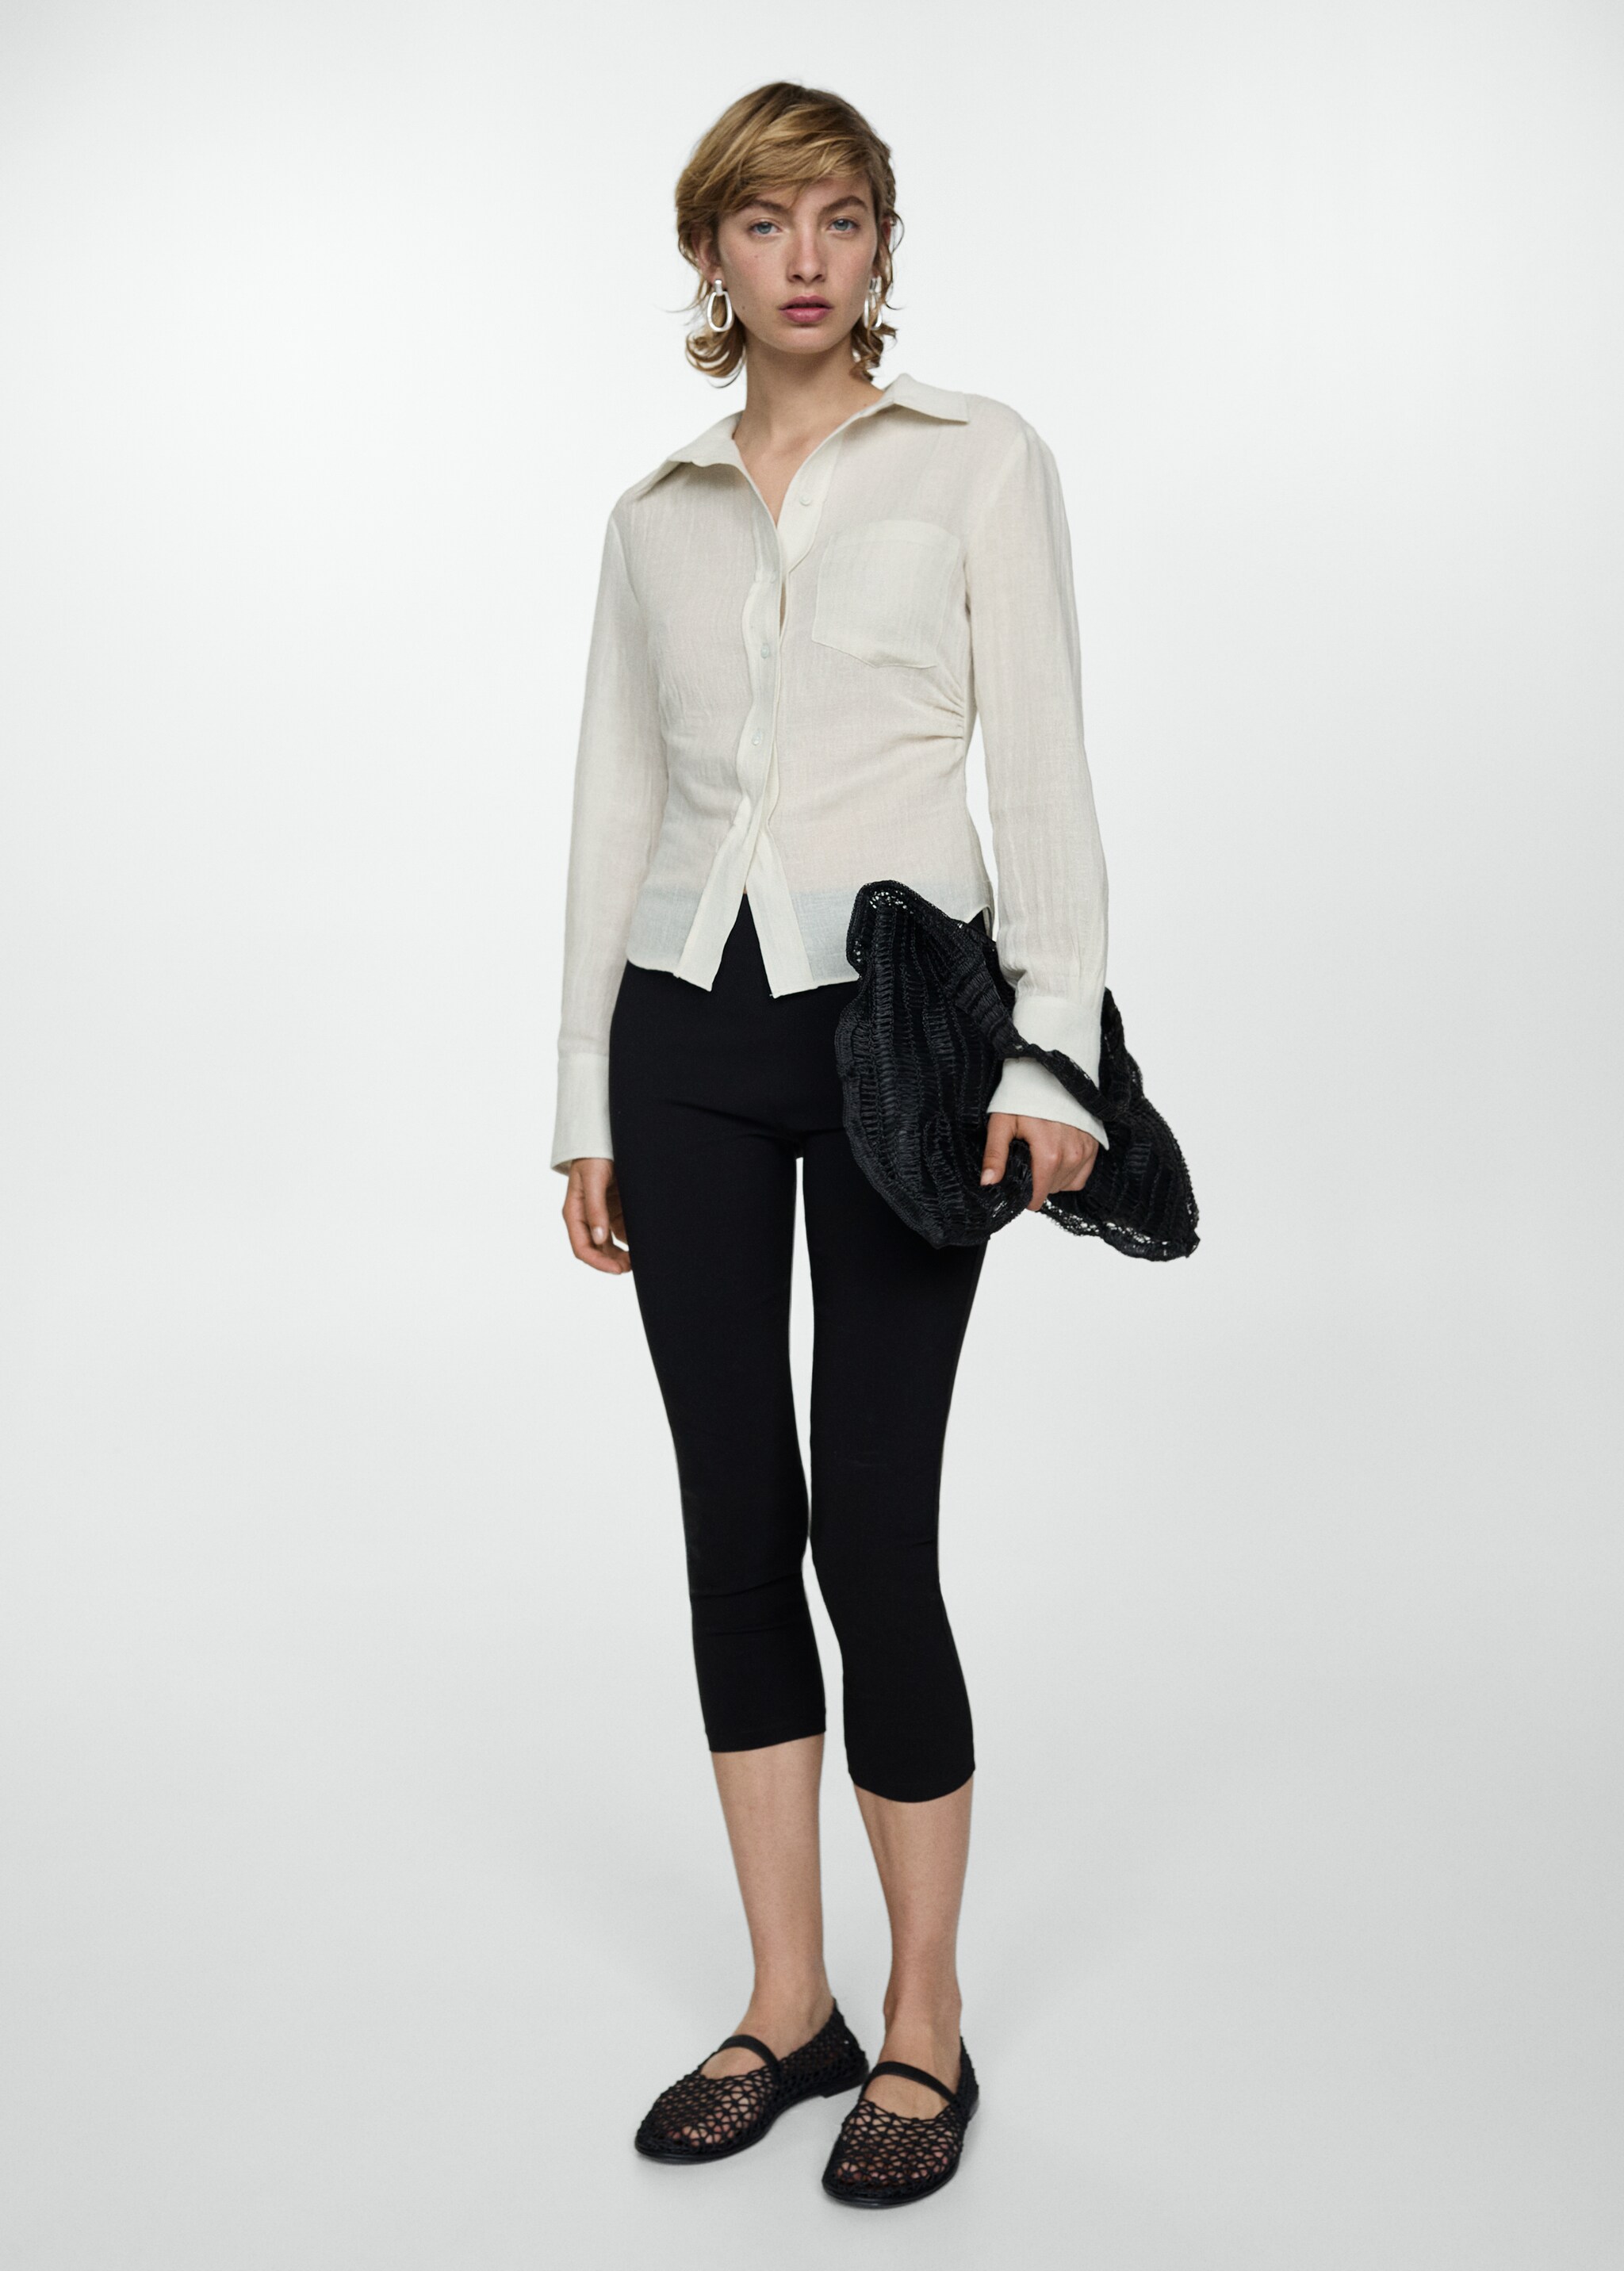 Linen shirt with draped detail - General plane